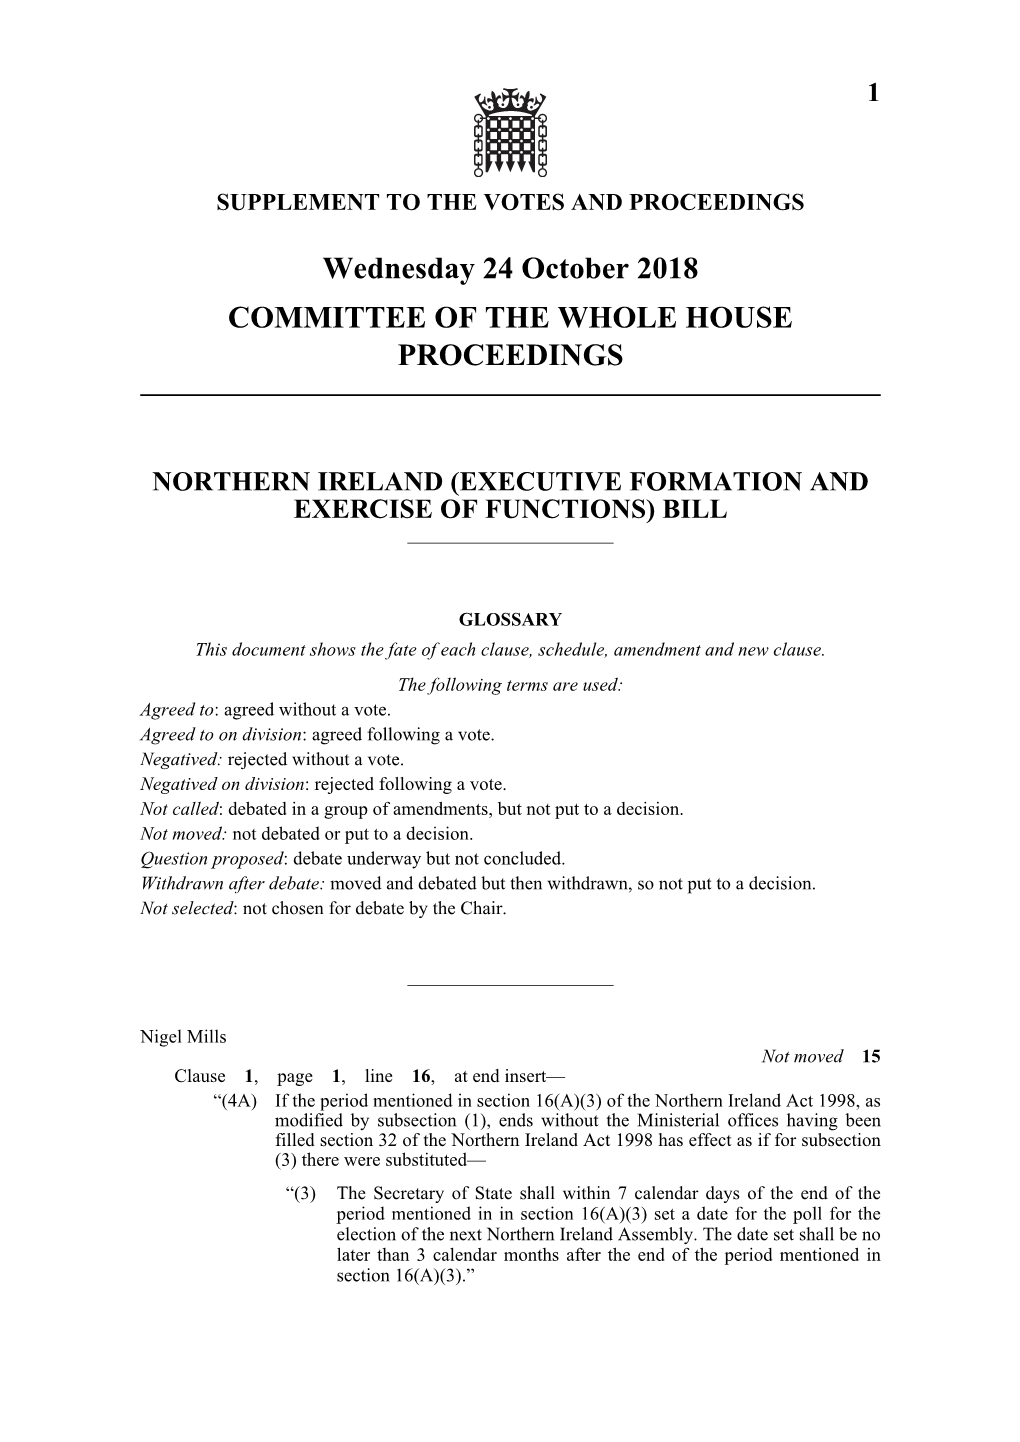 Wednesday 24 October 2018 COMMITTEE of the WHOLE HOUSE PROCEEDINGS